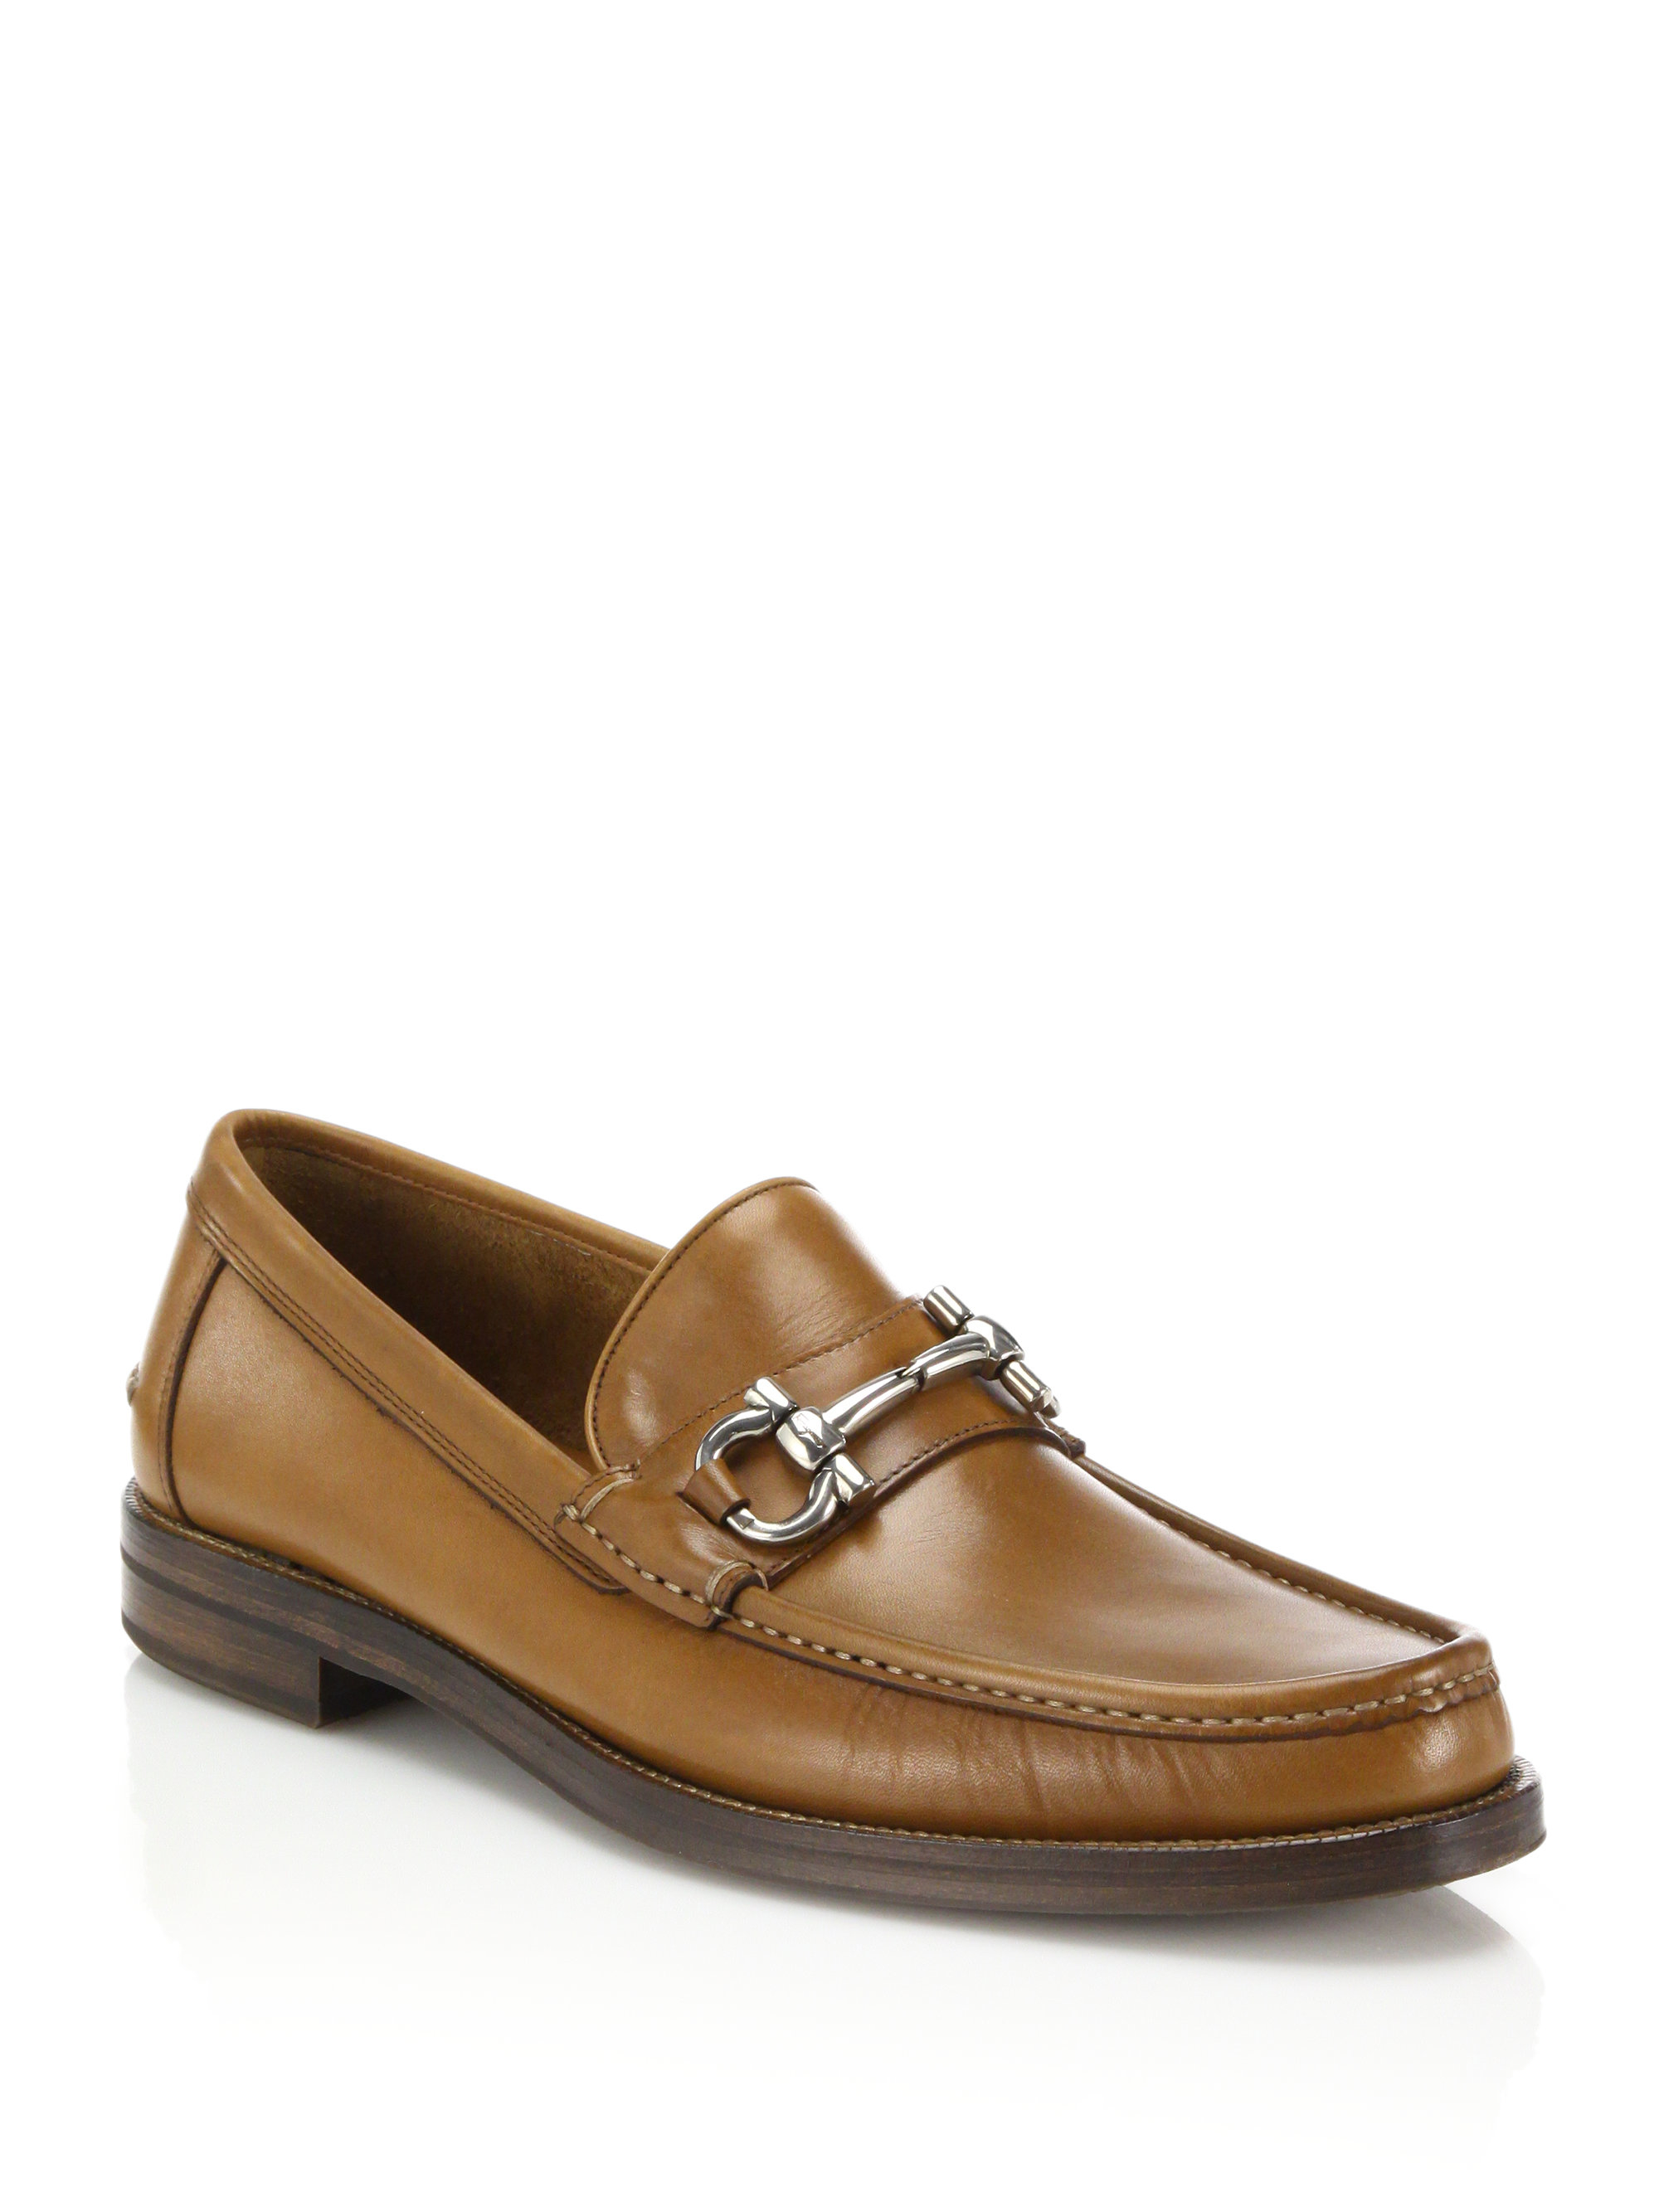 Ferragamo Loriano Leather Bit Loafers in Brown for Men | Lyst